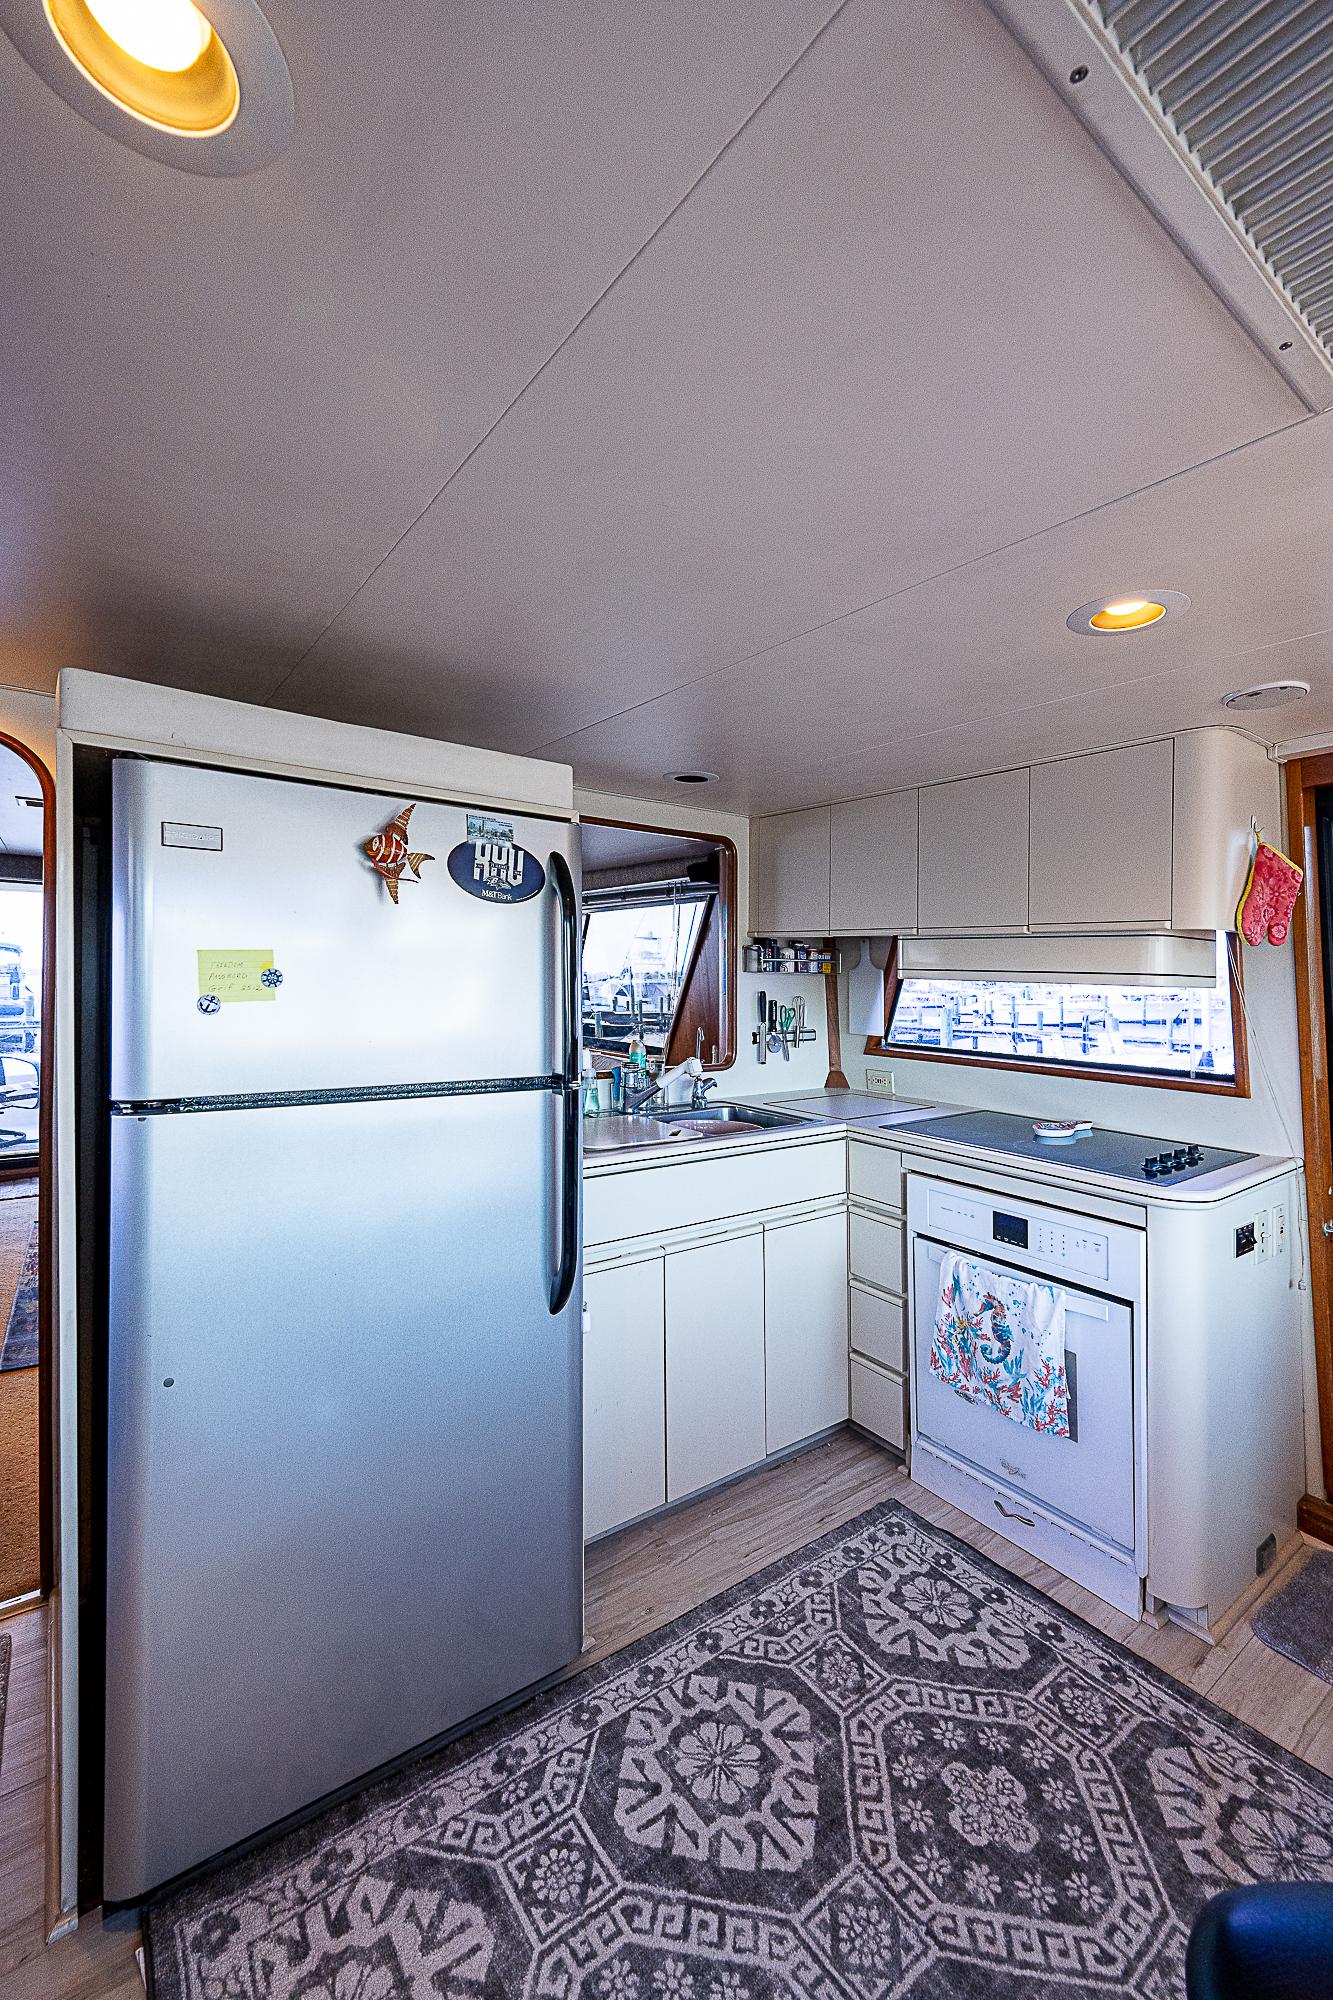 Viking 50 Cockpit Motor Yacht Freedom-Galley, Refrigerator, and Stove